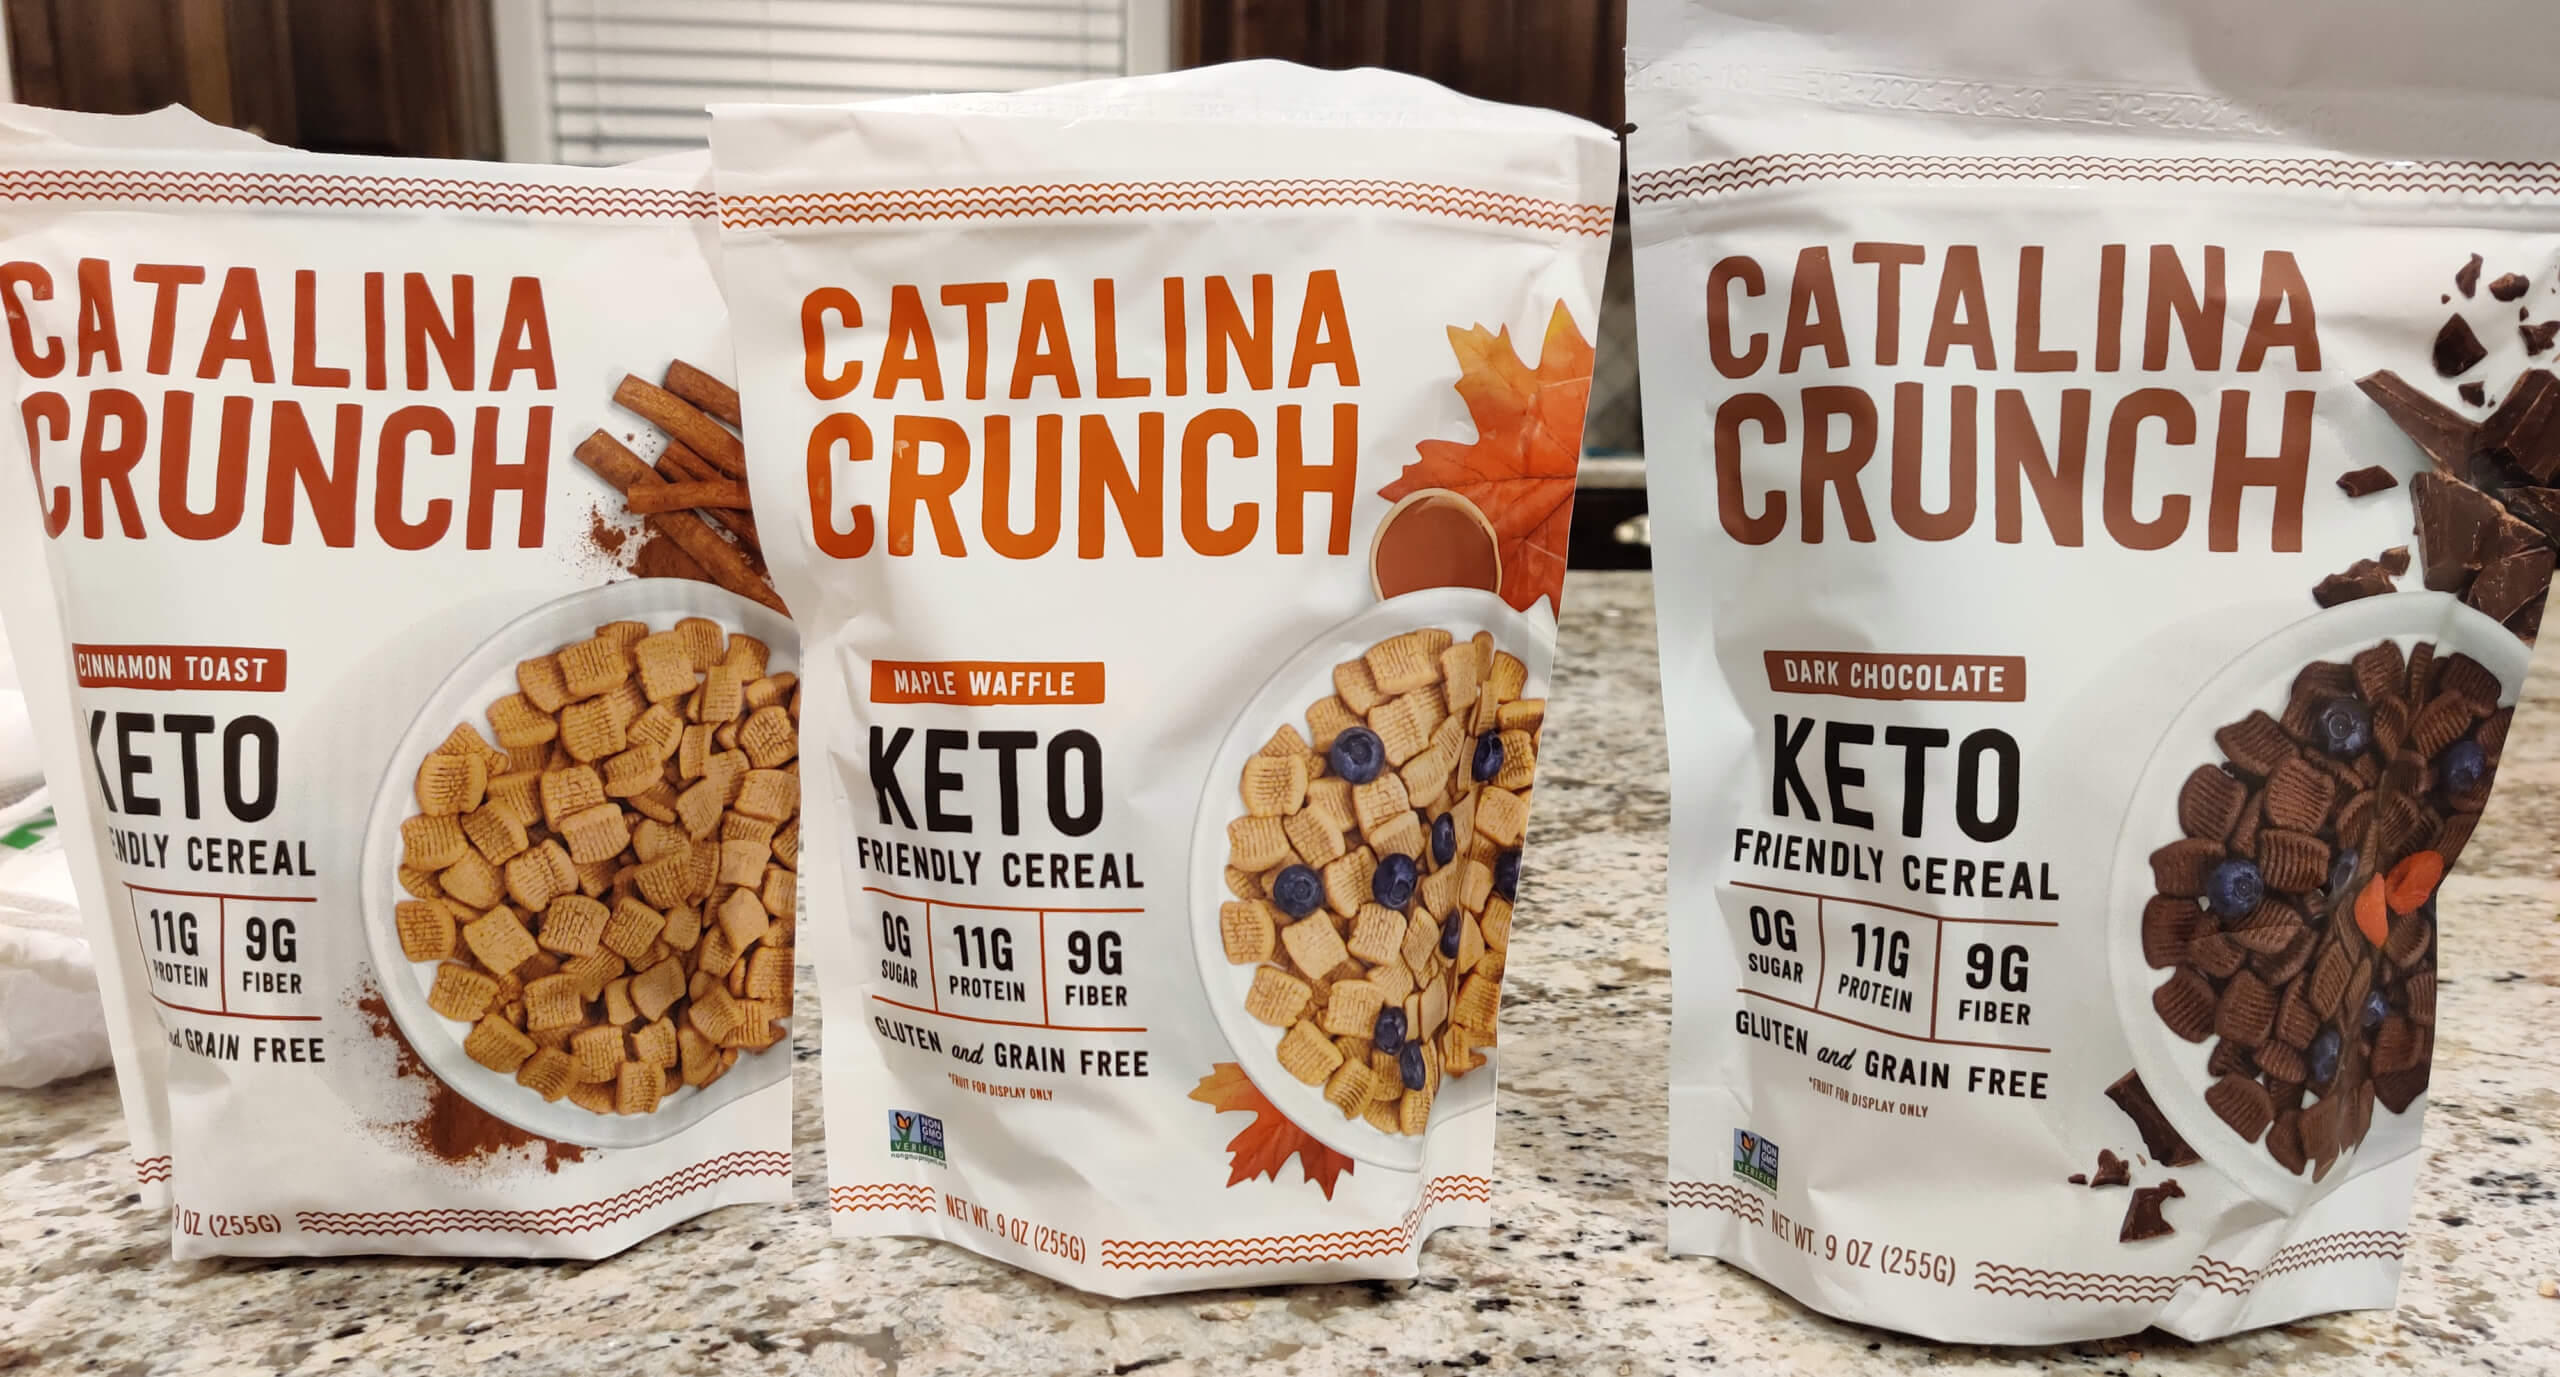 Catalina Crunch packaging front